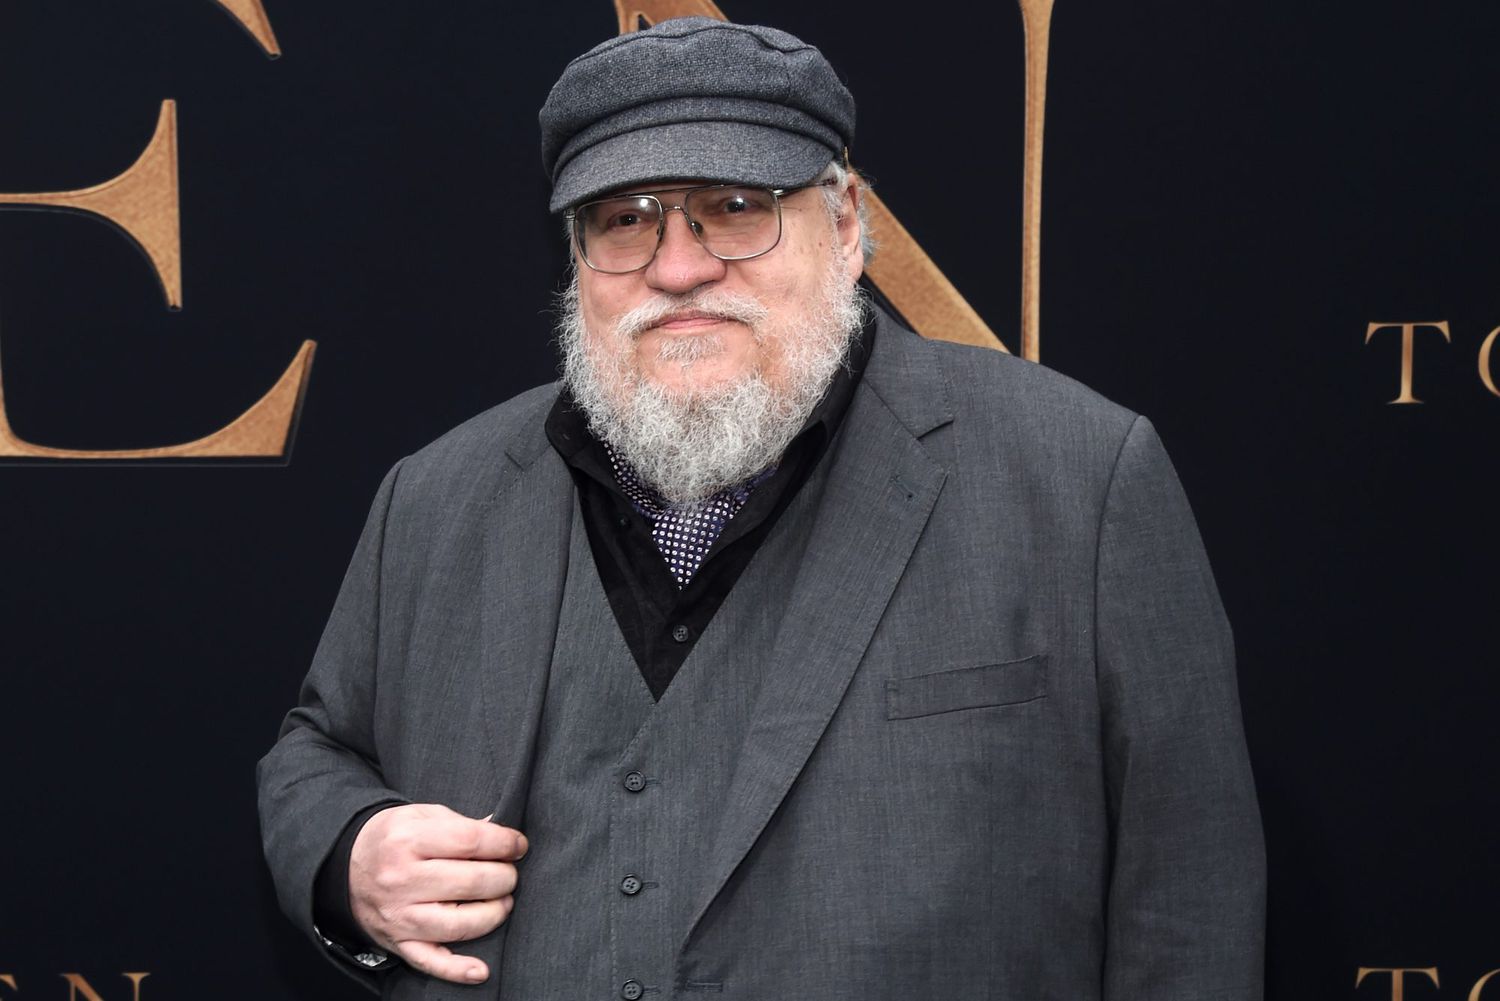 WESTWOOD, CALIFORNIA - MAY 08: George R. R. Martin arrives at the LA Special Screening of Fox Searchlight Pictures' "Tolkien" at the Regency Village Theatre on May 08, 2019 in Westwood, California. (Photo by Amanda Edwards/Getty Images,)